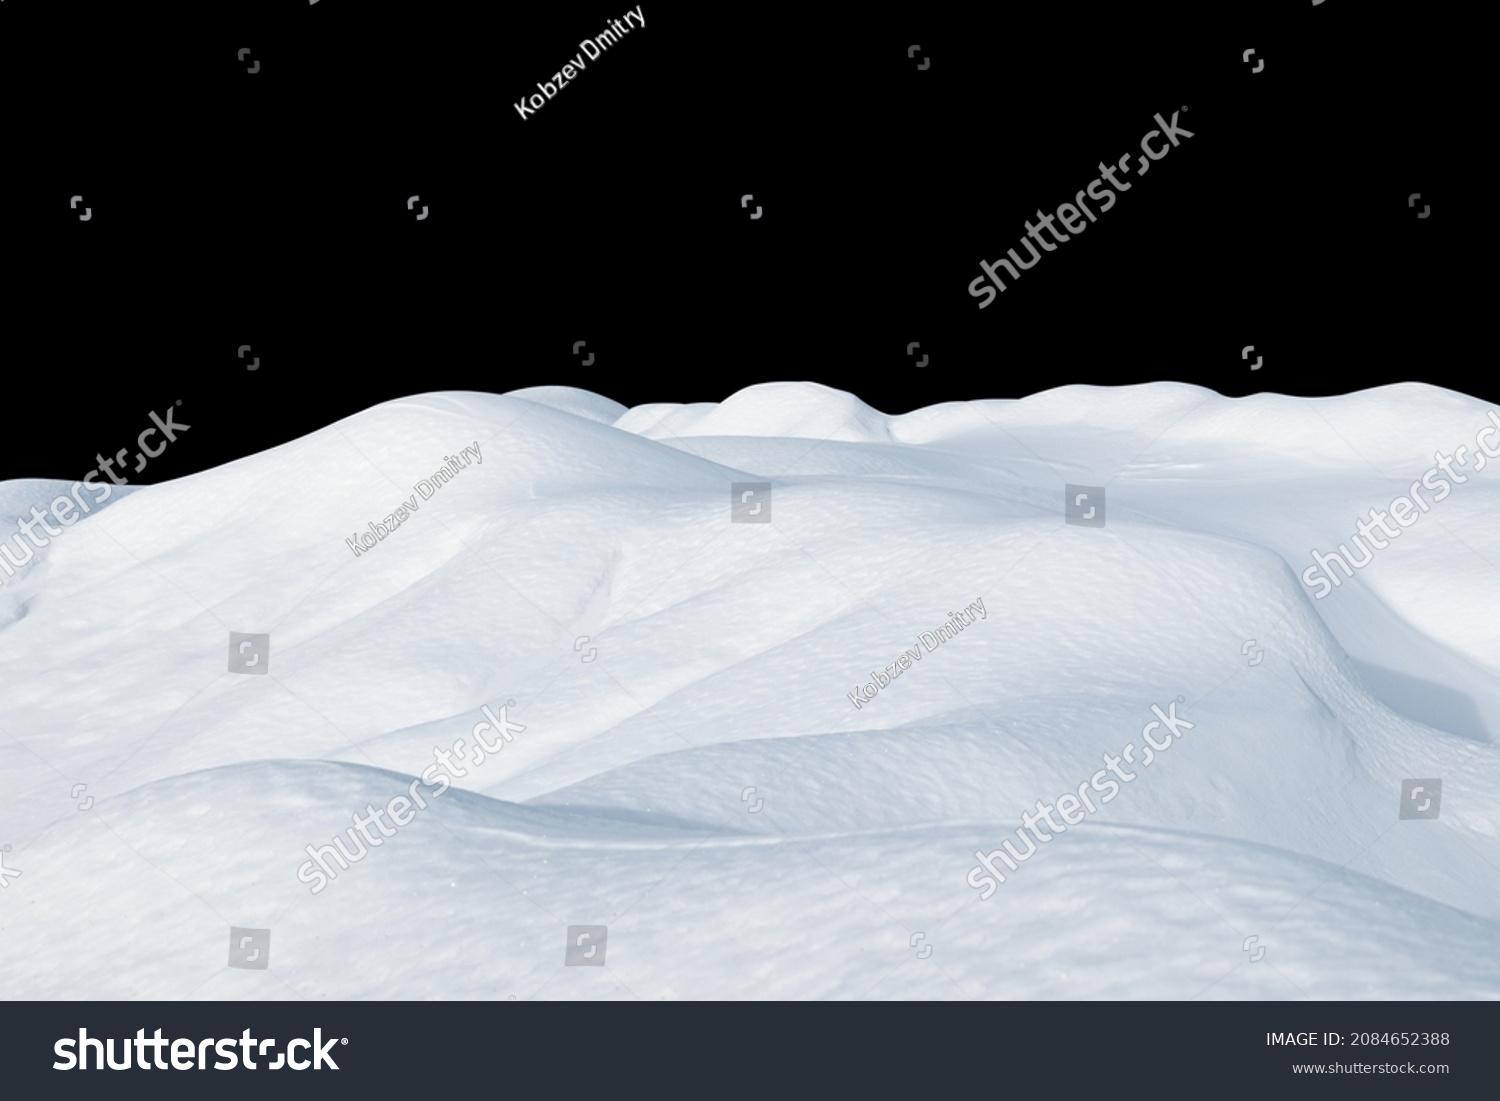 Snow drifts on a black isolated background. Snowy landscape of the hills of the North. Winter season. #2084652388